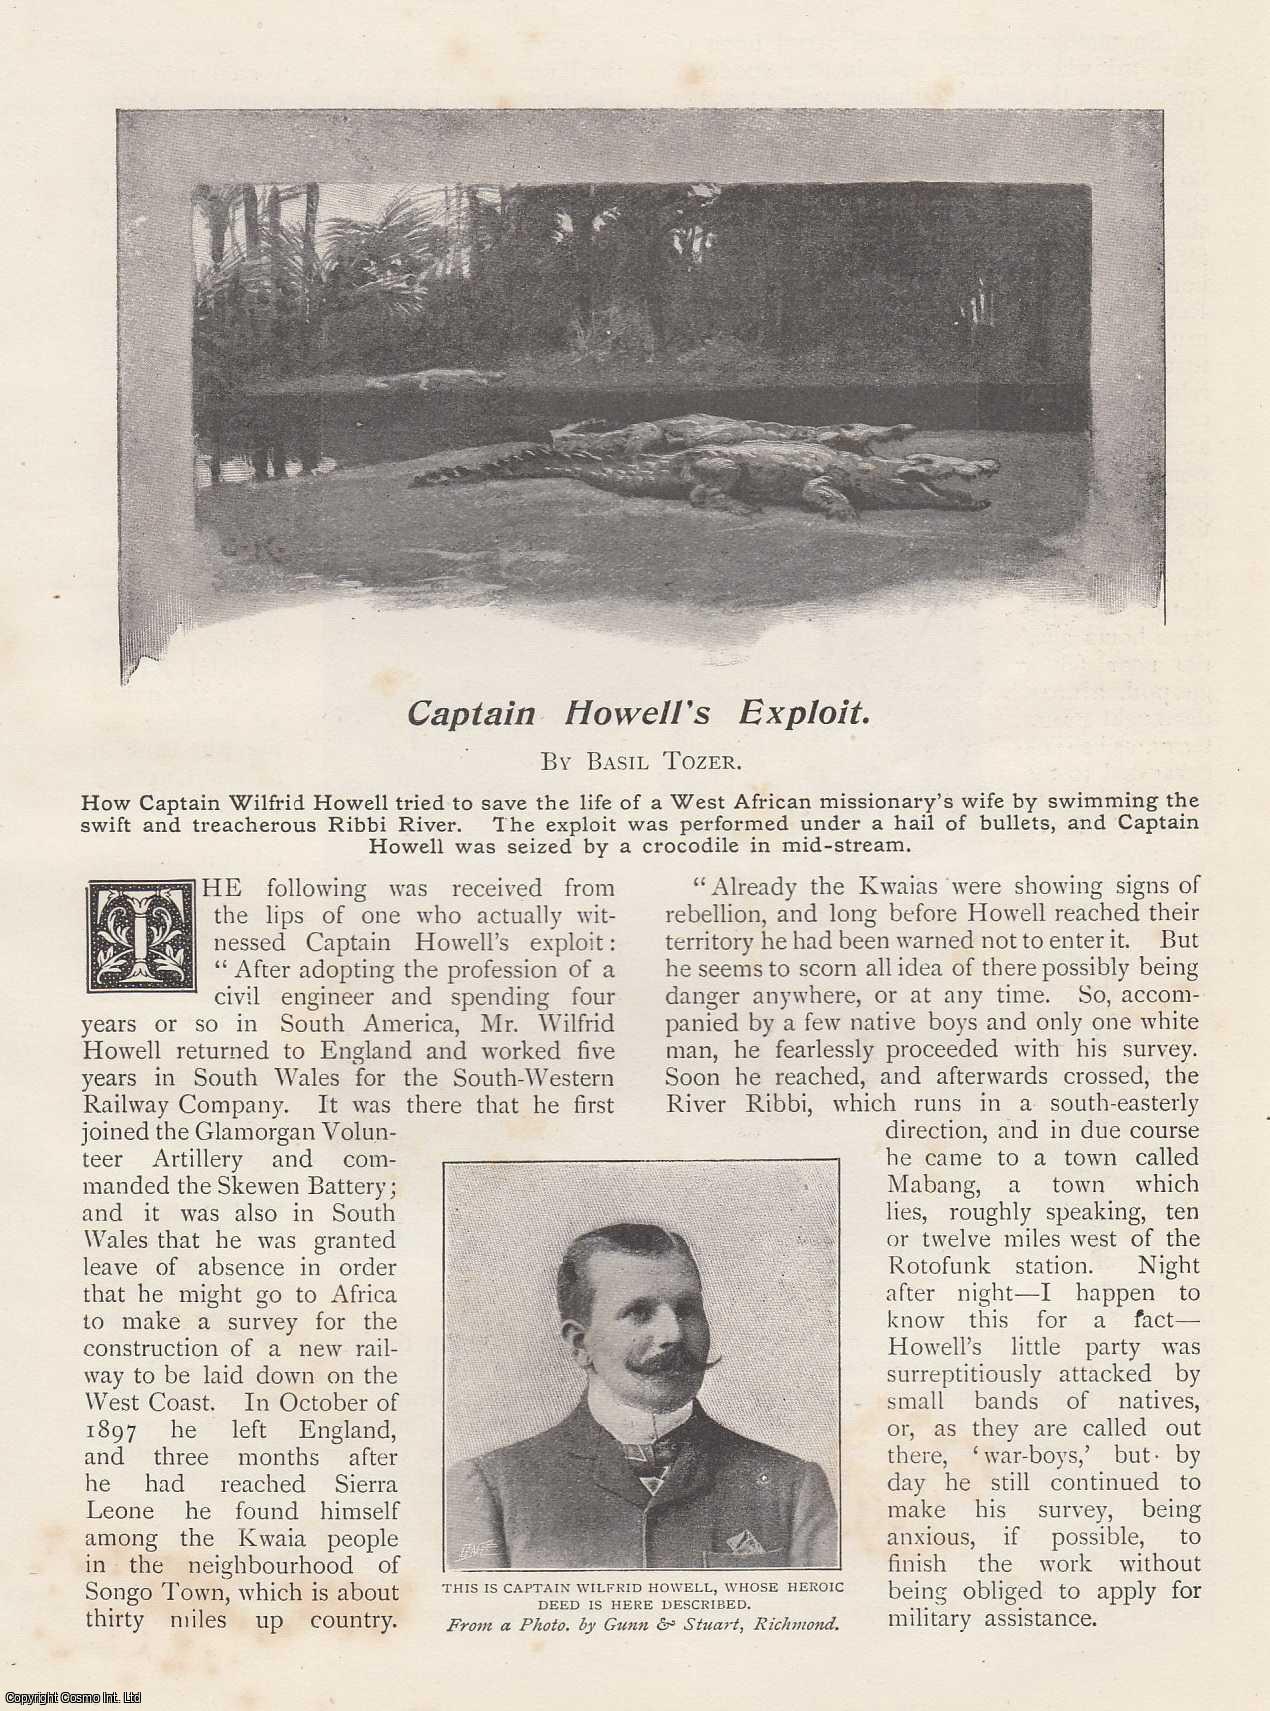 Basil Tozer - Captain Howell's Exploit. An uncommon original article from the Wide World Magazine, 1899.